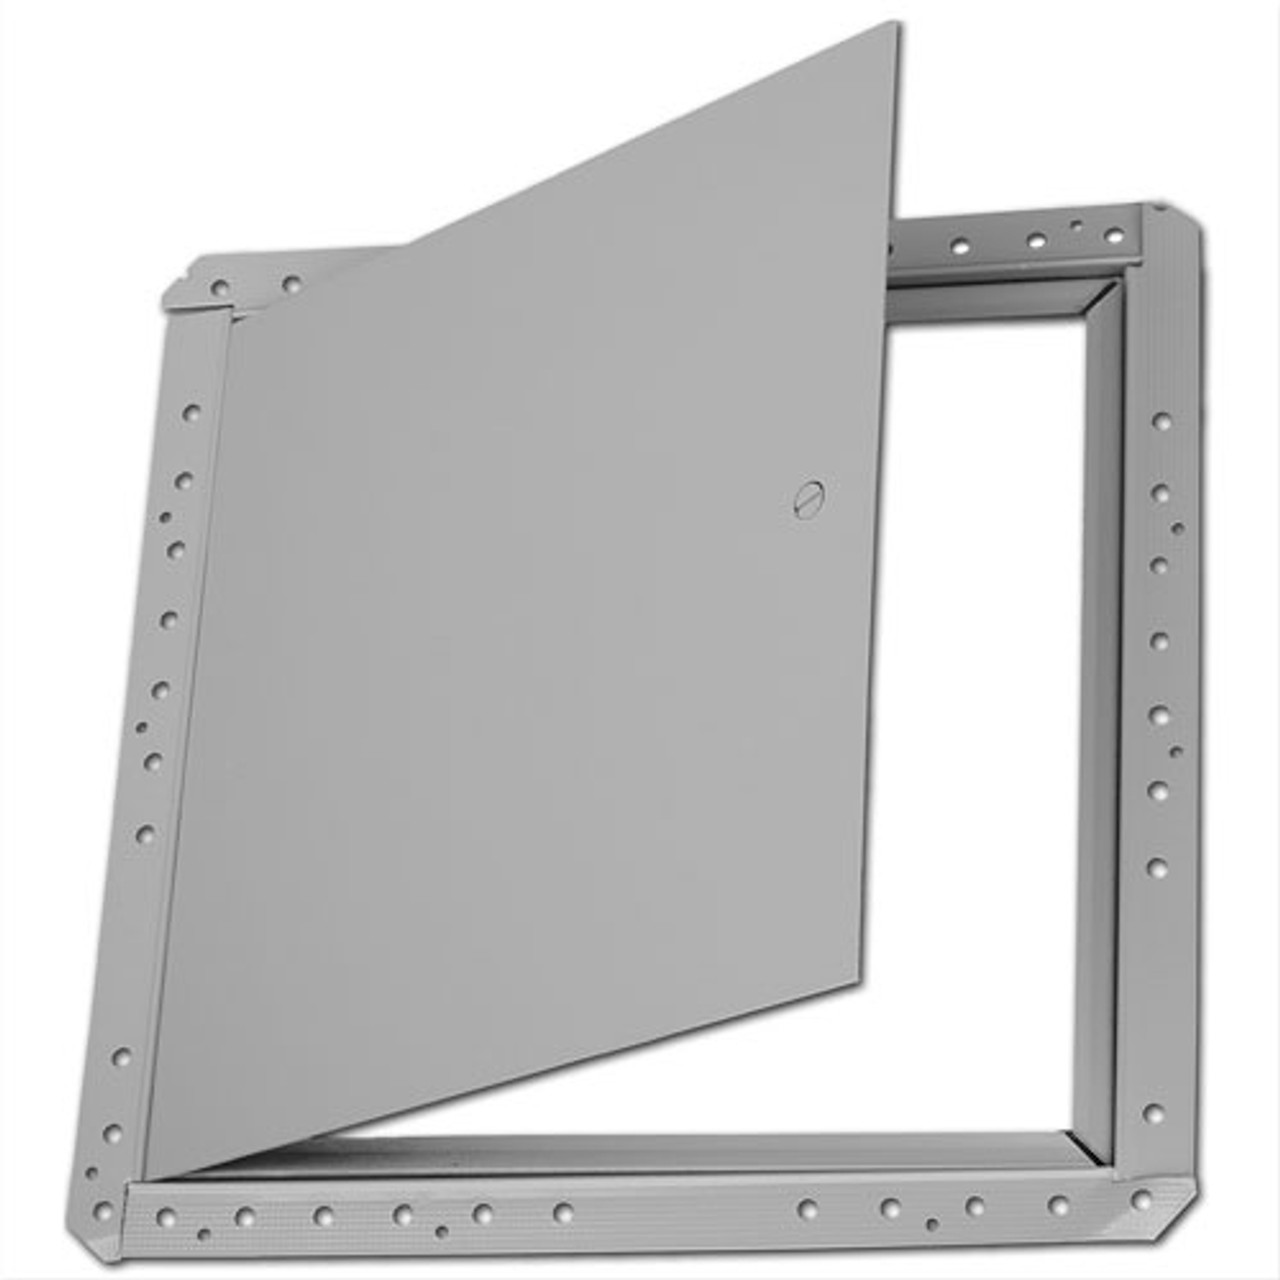 Milcor Standard Access Door For Drywall Ceilings Or Walls Dw